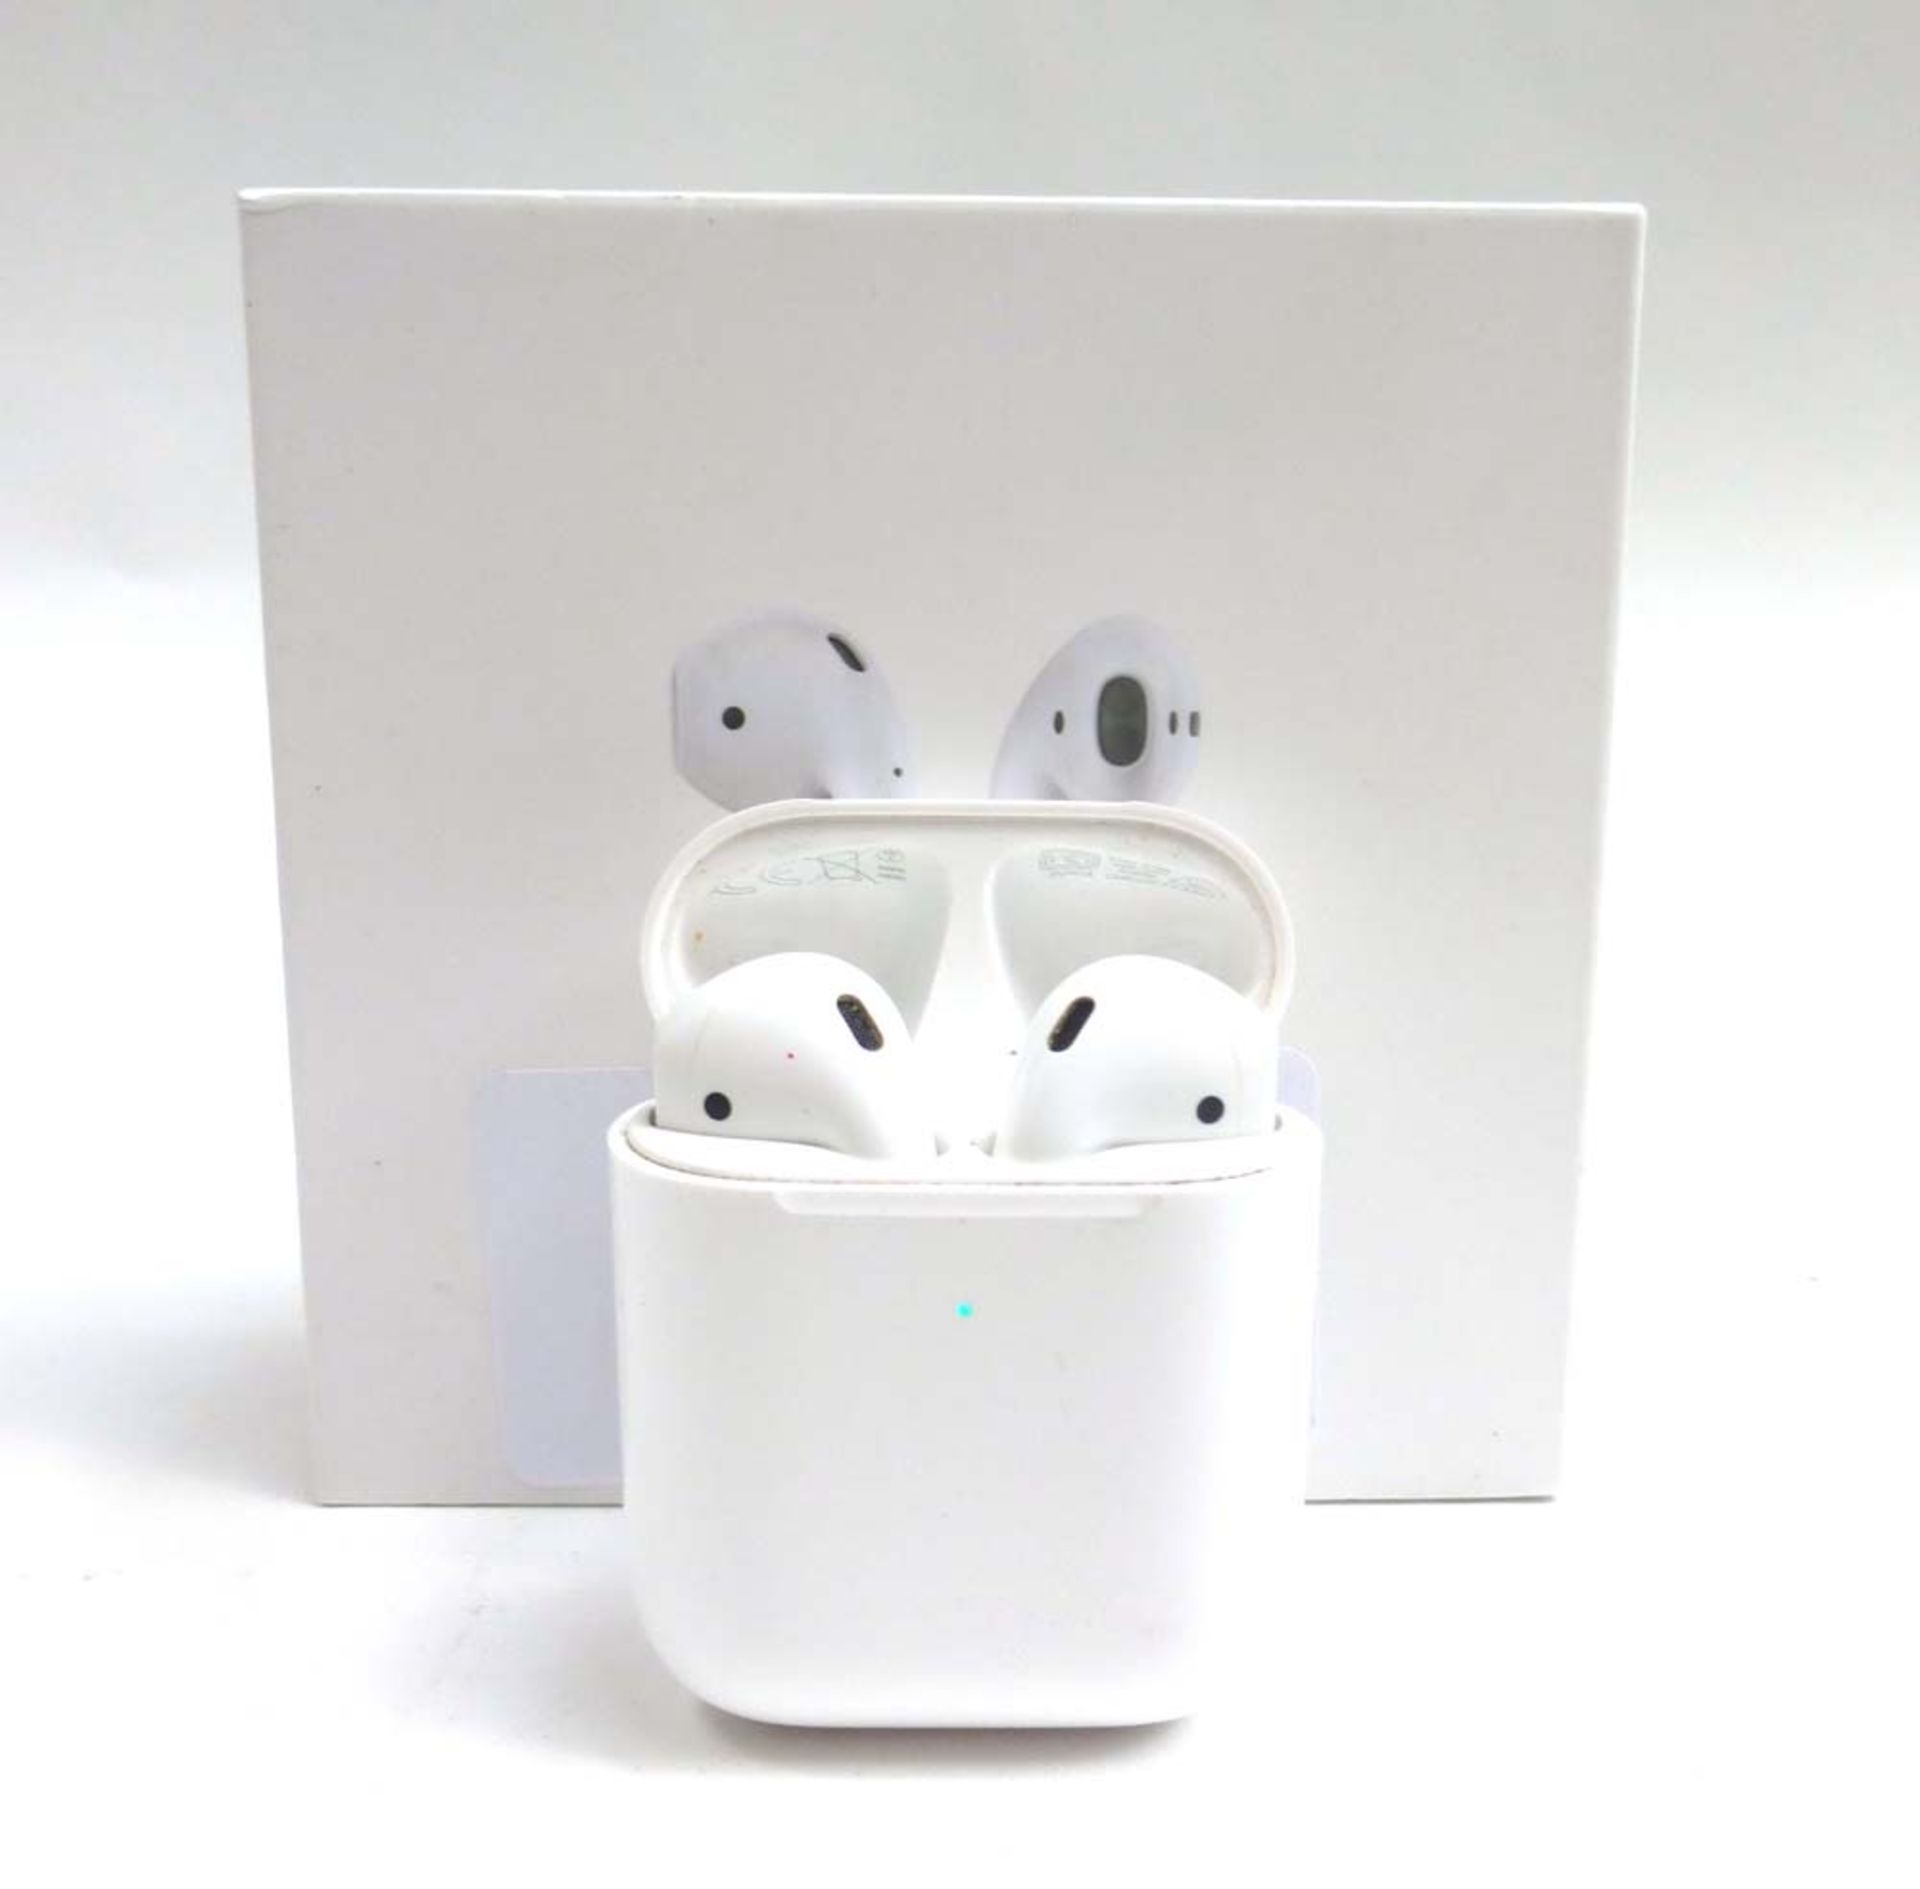 AirPods 2nd Generation A2032 in box